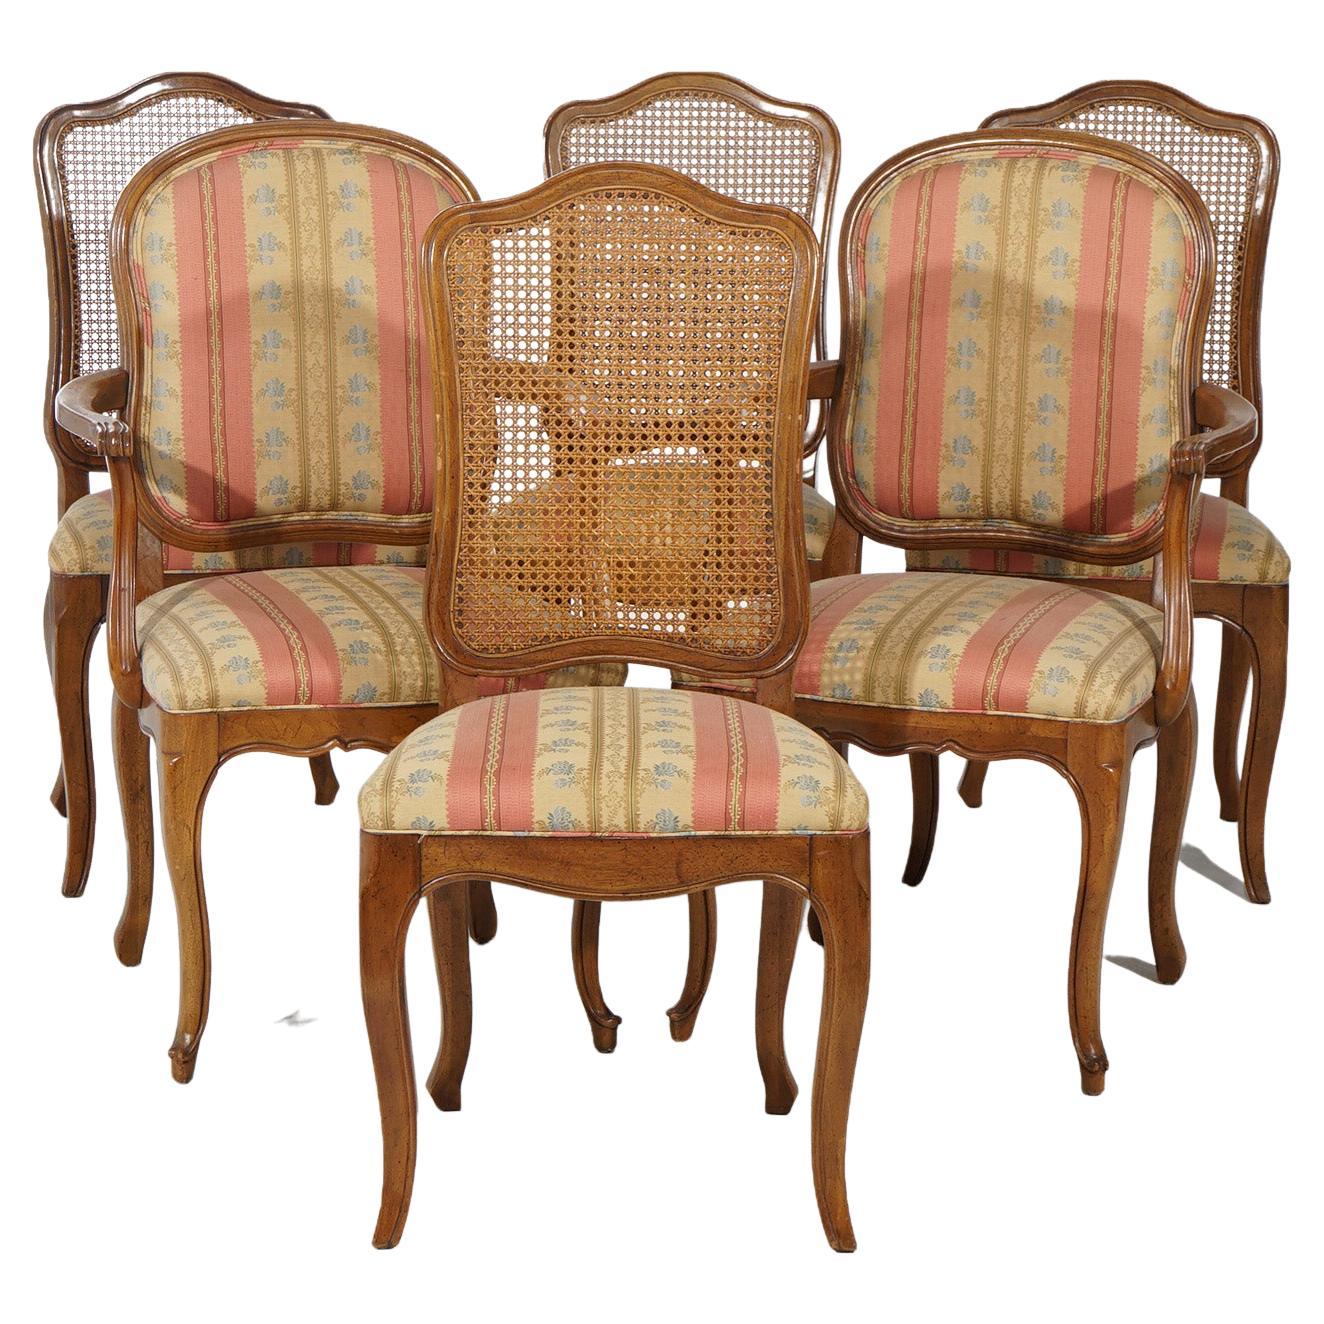 Six French Louis XIV Style Mahogany & Cane Dining Chairs 20th C For Sale